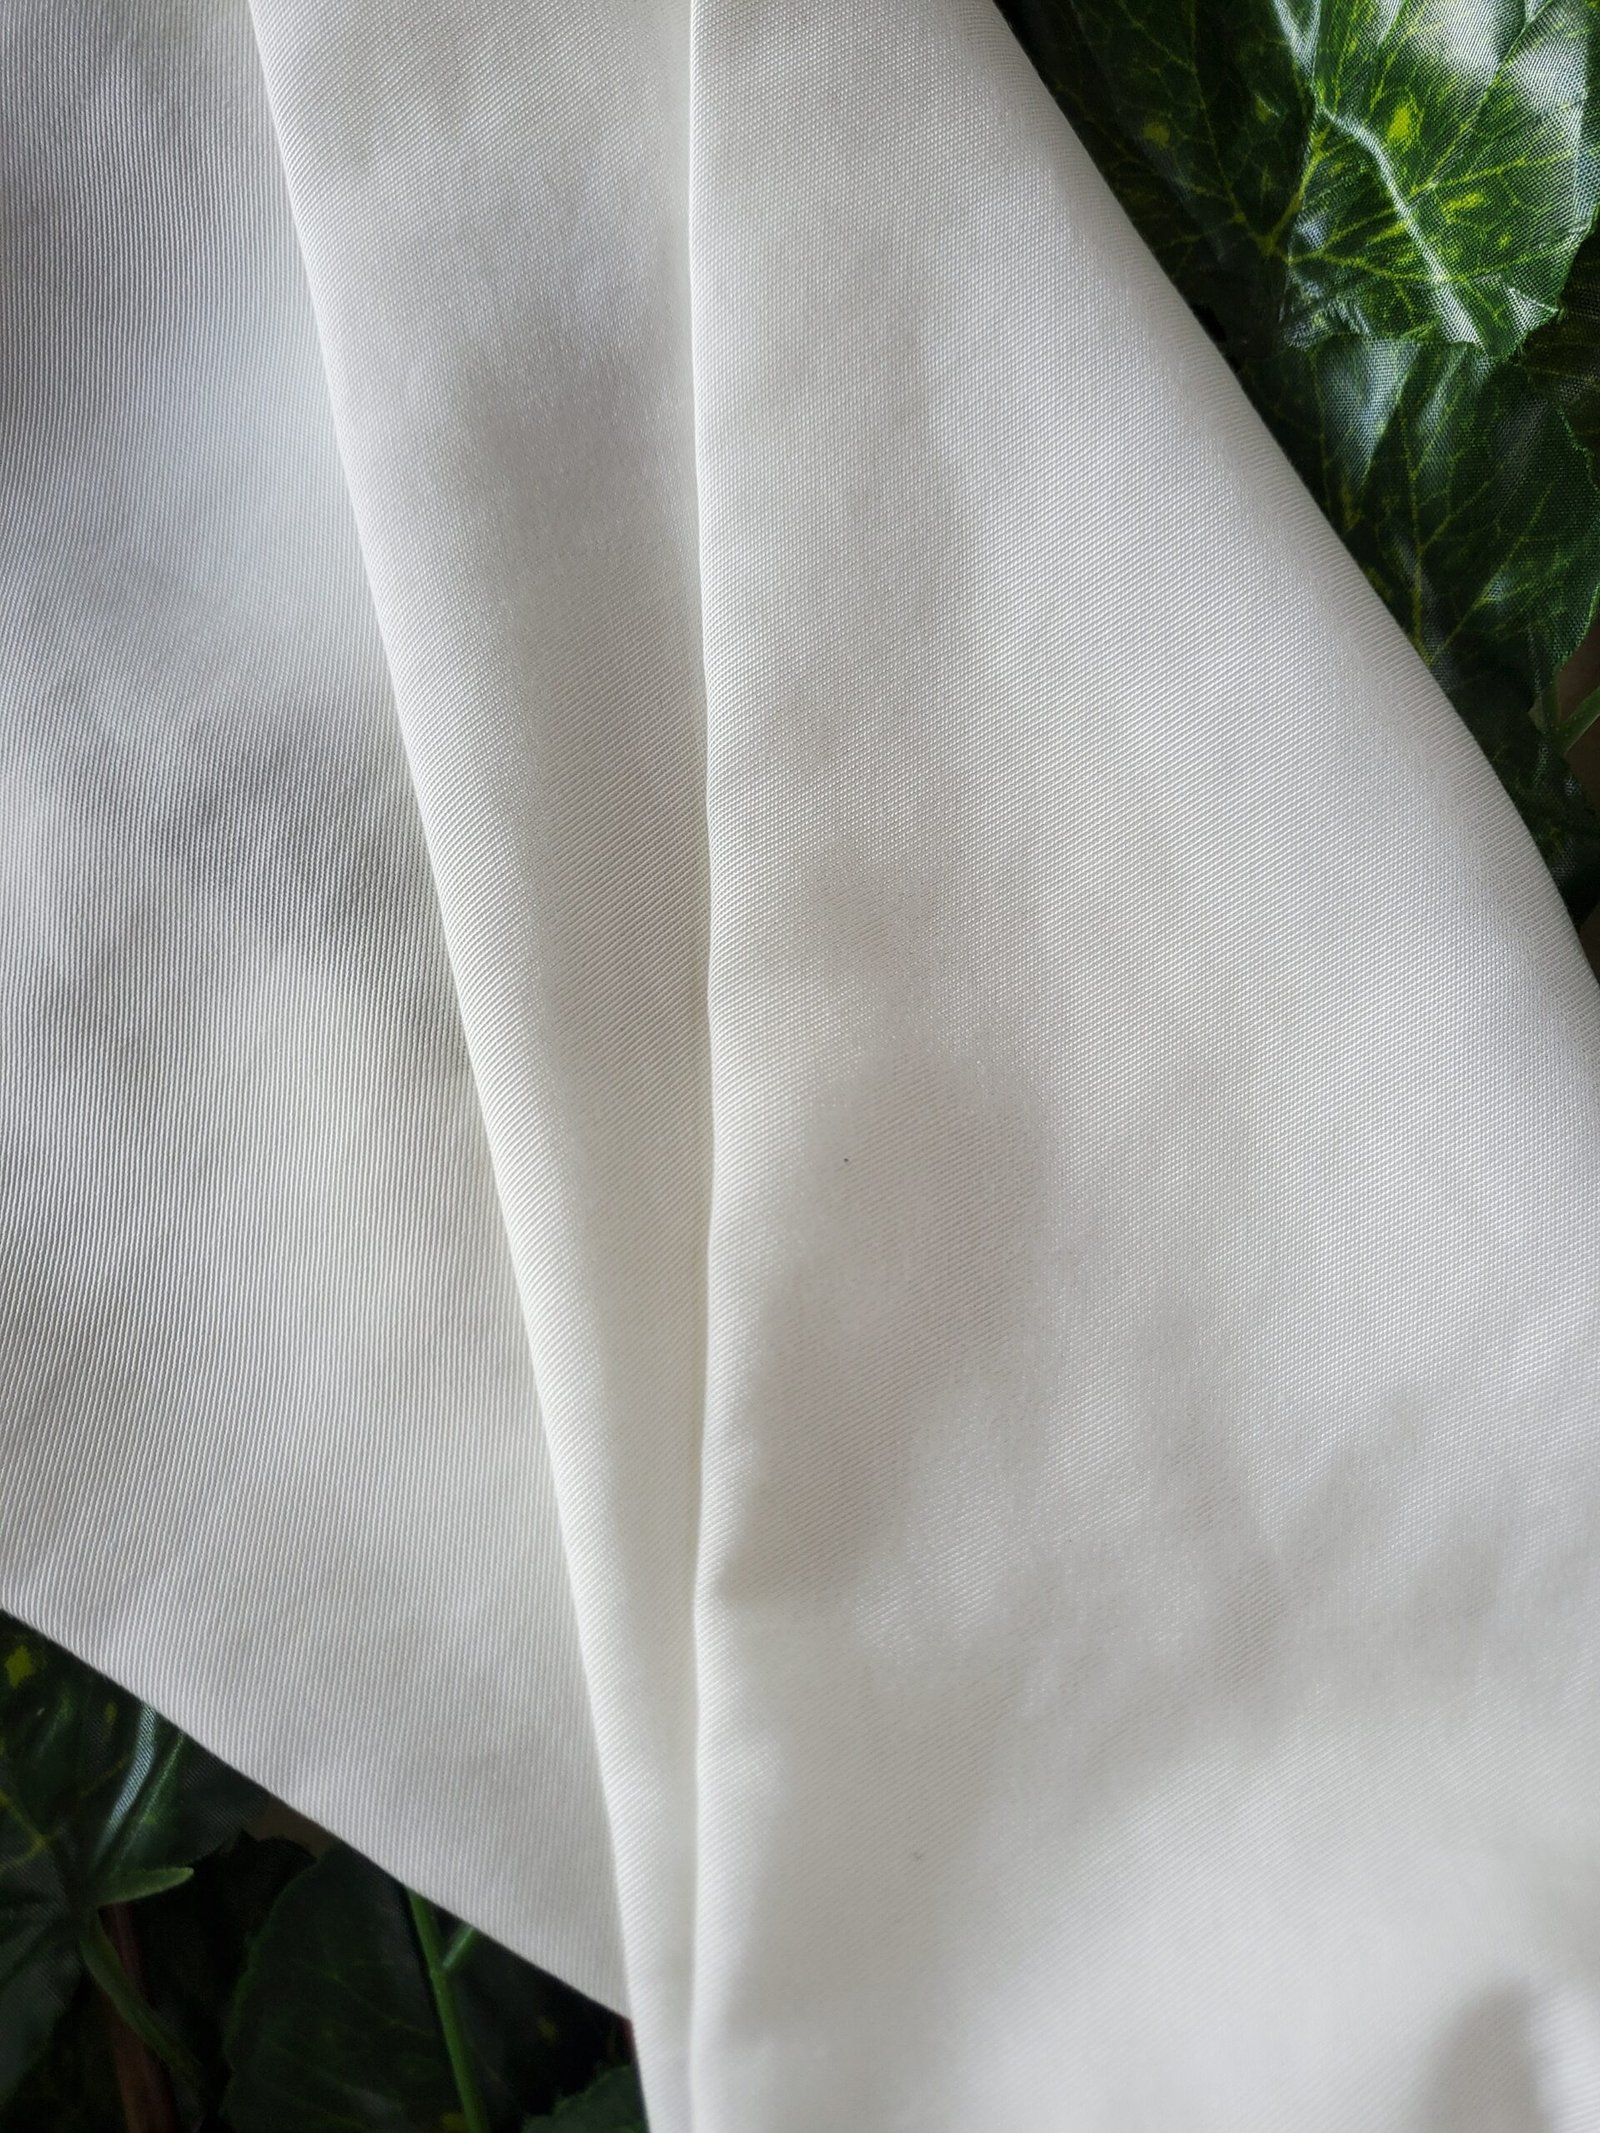 COTTON 60% X LYOCELL 35% X LINEN 15% TWILL FABRIC 58 INCH WIDE WHITE D –